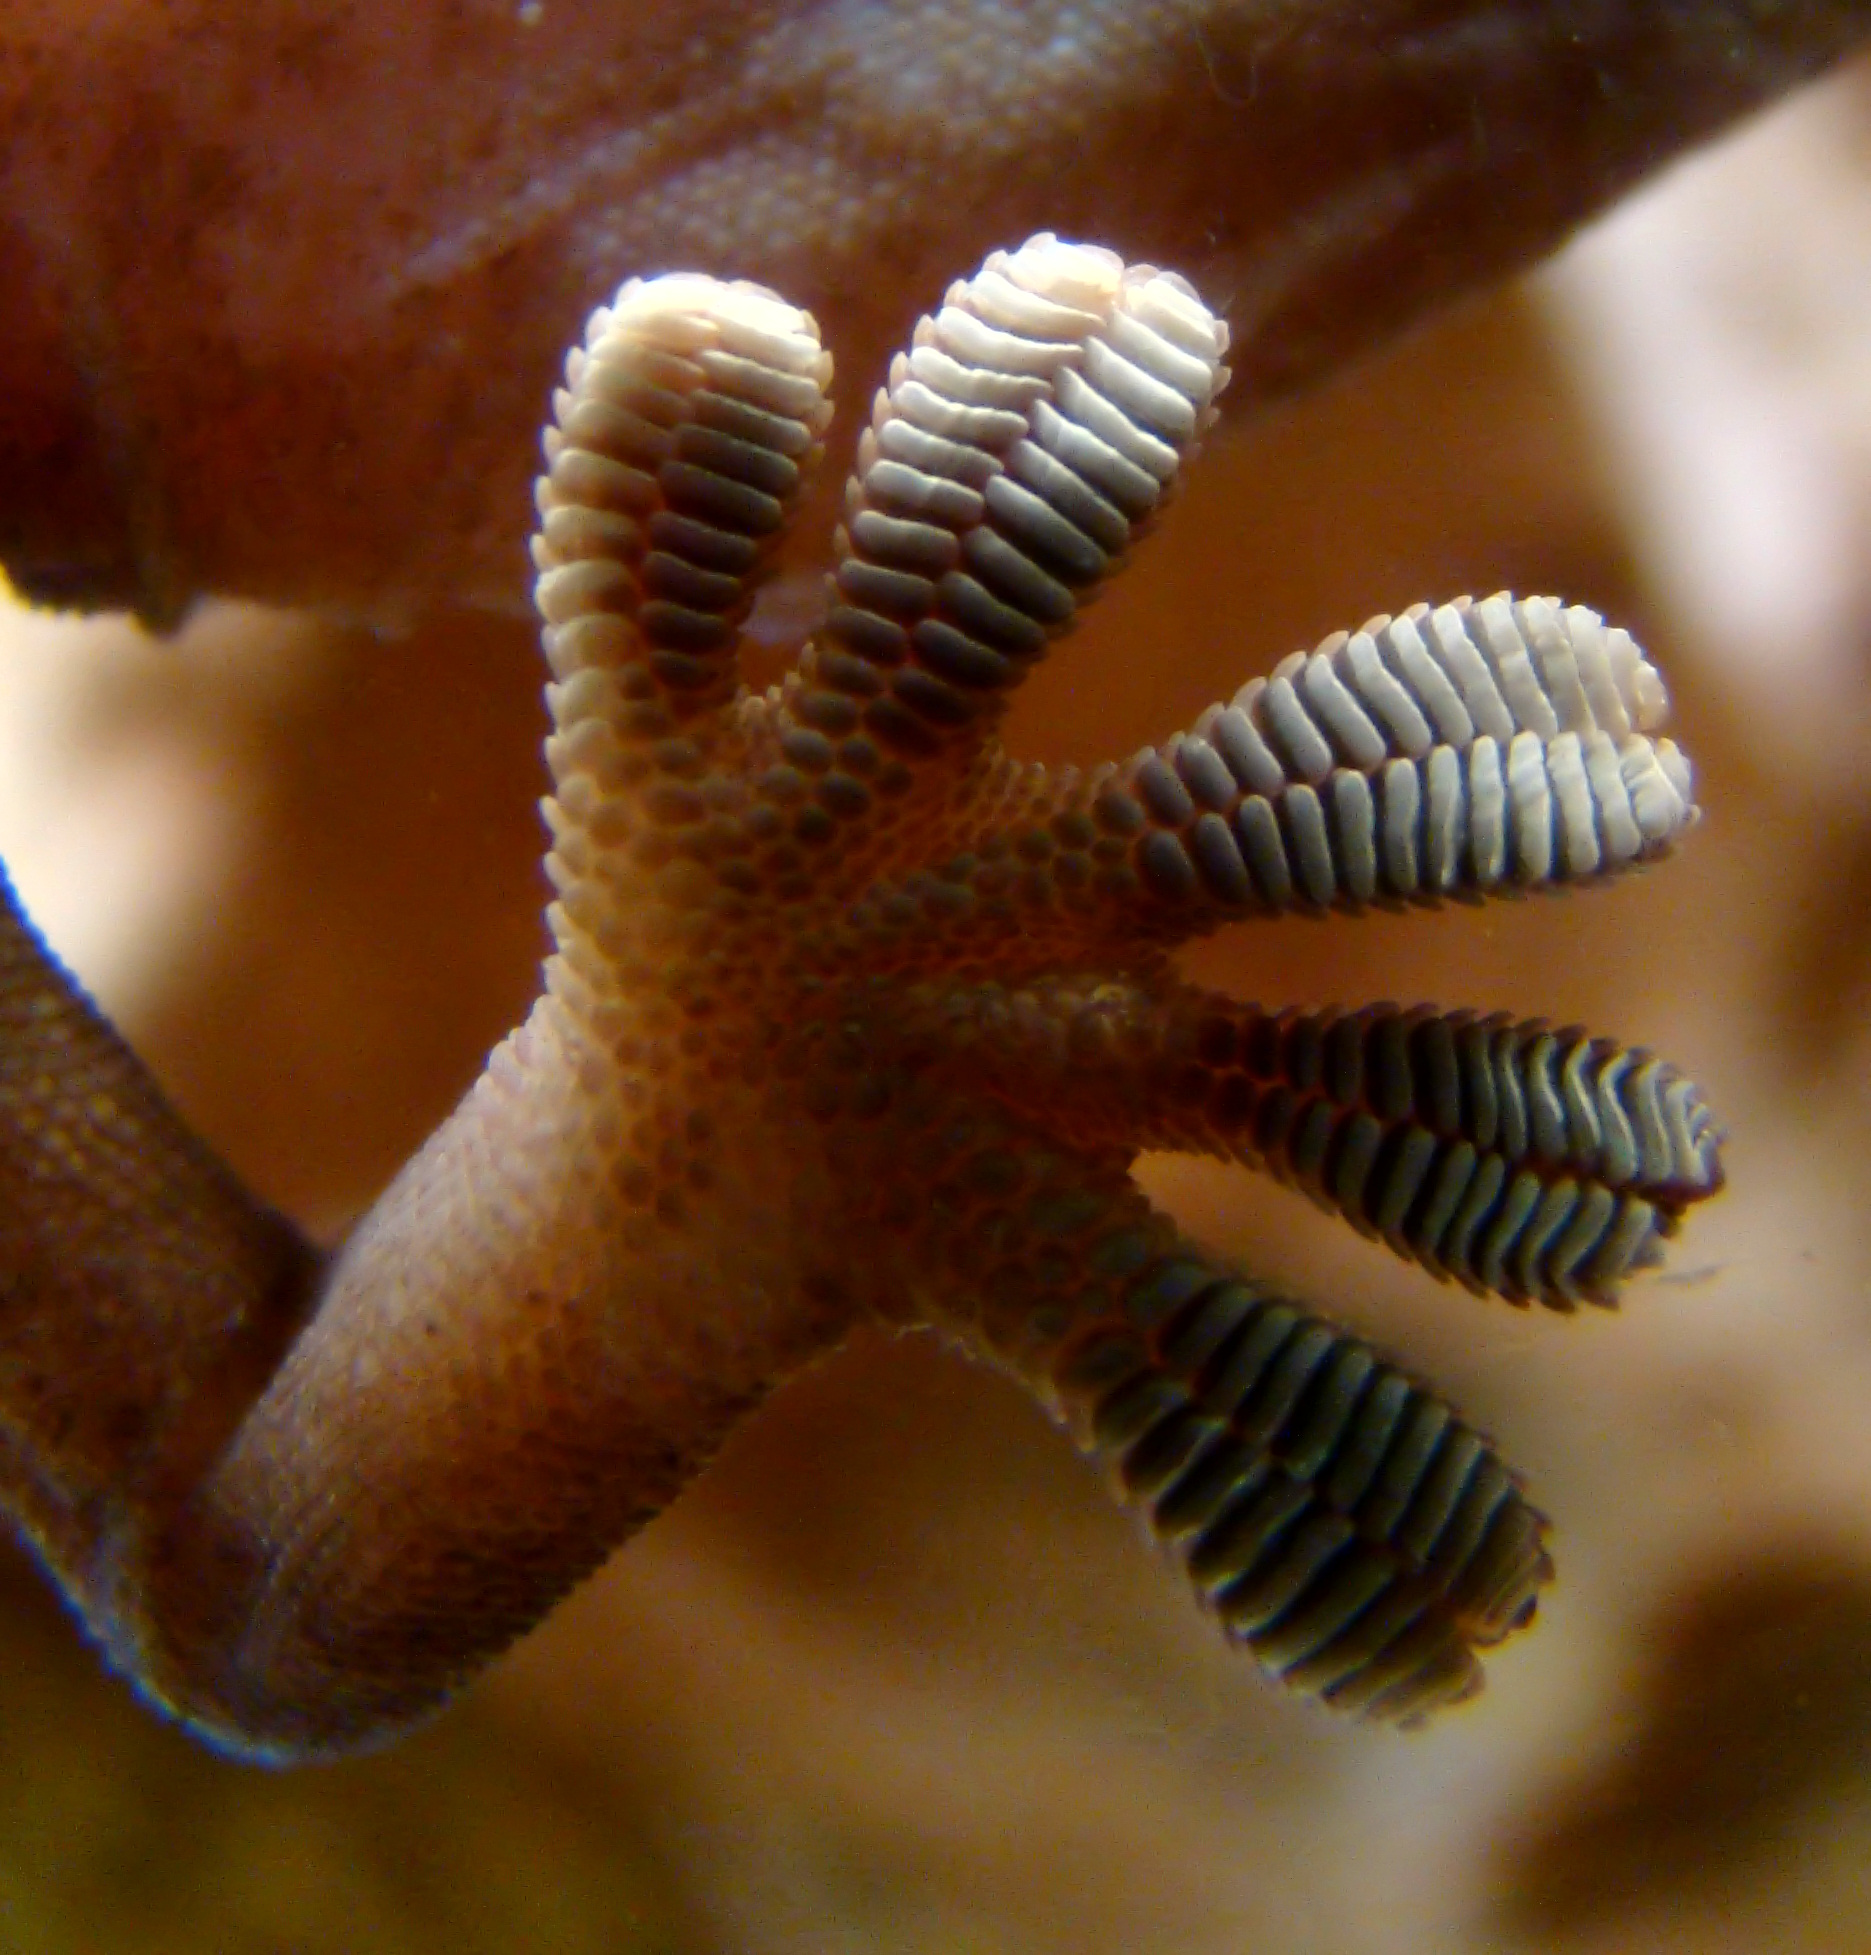 JPL researchers were inspired by gecko feet, such as the one shown here